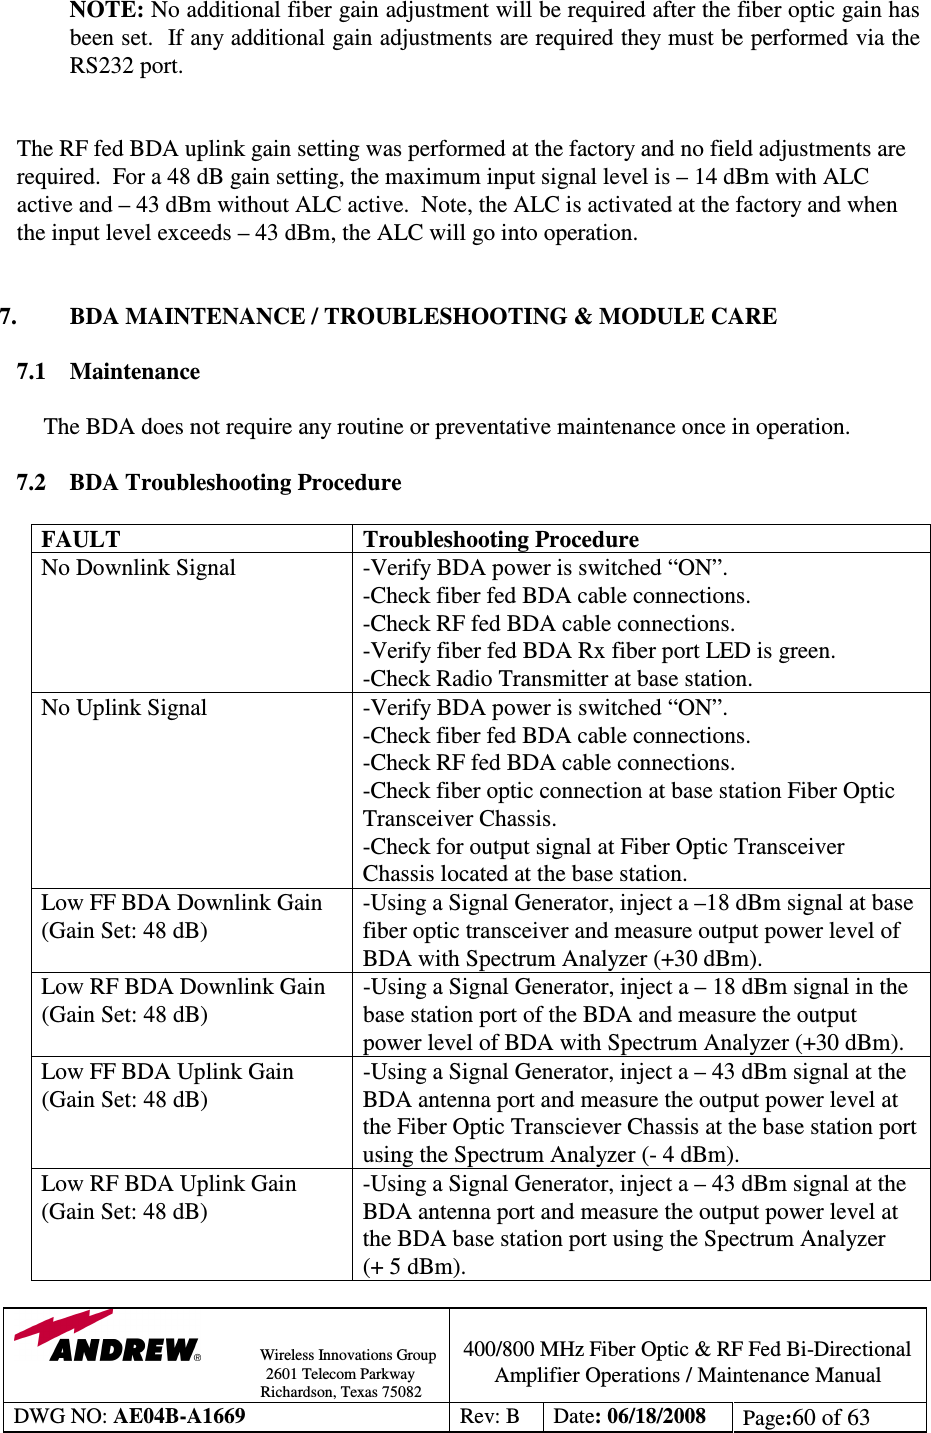                Wireless Innovations Group                                                                                        2601 Telecom Parkway                                                         Richardson, Texas 75082  400/800 MHz Fiber Optic &amp; RF Fed Bi-Directional Amplifier Operations / Maintenance Manual DWG NO: AE04B-A1669  Rev: B  Date: 06/18/2008  Page:60 of 63  NOTE: No additional fiber gain adjustment will be required after the fiber optic gain has been set.  If any additional gain adjustments are required they must be performed via the RS232 port.   The RF fed BDA uplink gain setting was performed at the factory and no field adjustments are required.  For a 48 dB gain setting, the maximum input signal level is – 14 dBm with ALC active and – 43 dBm without ALC active.  Note, the ALC is activated at the factory and when the input level exceeds – 43 dBm, the ALC will go into operation.   7.  BDA MAINTENANCE / TROUBLESHOOTING &amp; MODULE CARE  7.1  Maintenance  The BDA does not require any routine or preventative maintenance once in operation.  7.2 BDA Troubleshooting Procedure  FAULT  Troubleshooting Procedure No Downlink Signal  -Verify BDA power is switched “ON”. -Check fiber fed BDA cable connections. -Check RF fed BDA cable connections. -Verify fiber fed BDA Rx fiber port LED is green. -Check Radio Transmitter at base station.  No Uplink Signal  -Verify BDA power is switched “ON”. -Check fiber fed BDA cable connections. -Check RF fed BDA cable connections. -Check fiber optic connection at base station Fiber Optic Transceiver Chassis. -Check for output signal at Fiber Optic Transceiver Chassis located at the base station. Low FF BDA Downlink Gain (Gain Set: 48 dB) -Using a Signal Generator, inject a –18 dBm signal at base fiber optic transceiver and measure output power level of BDA with Spectrum Analyzer (+30 dBm). Low RF BDA Downlink Gain (Gain Set: 48 dB) -Using a Signal Generator, inject a – 18 dBm signal in the base station port of the BDA and measure the output power level of BDA with Spectrum Analyzer (+30 dBm).  Low FF BDA Uplink Gain (Gain Set: 48 dB) -Using a Signal Generator, inject a – 43 dBm signal at the BDA antenna port and measure the output power level at the Fiber Optic Transciever Chassis at the base station port using the Spectrum Analyzer (- 4 dBm). Low RF BDA Uplink Gain (Gain Set: 48 dB) -Using a Signal Generator, inject a – 43 dBm signal at the BDA antenna port and measure the output power level at the BDA base station port using the Spectrum Analyzer  (+ 5 dBm). 